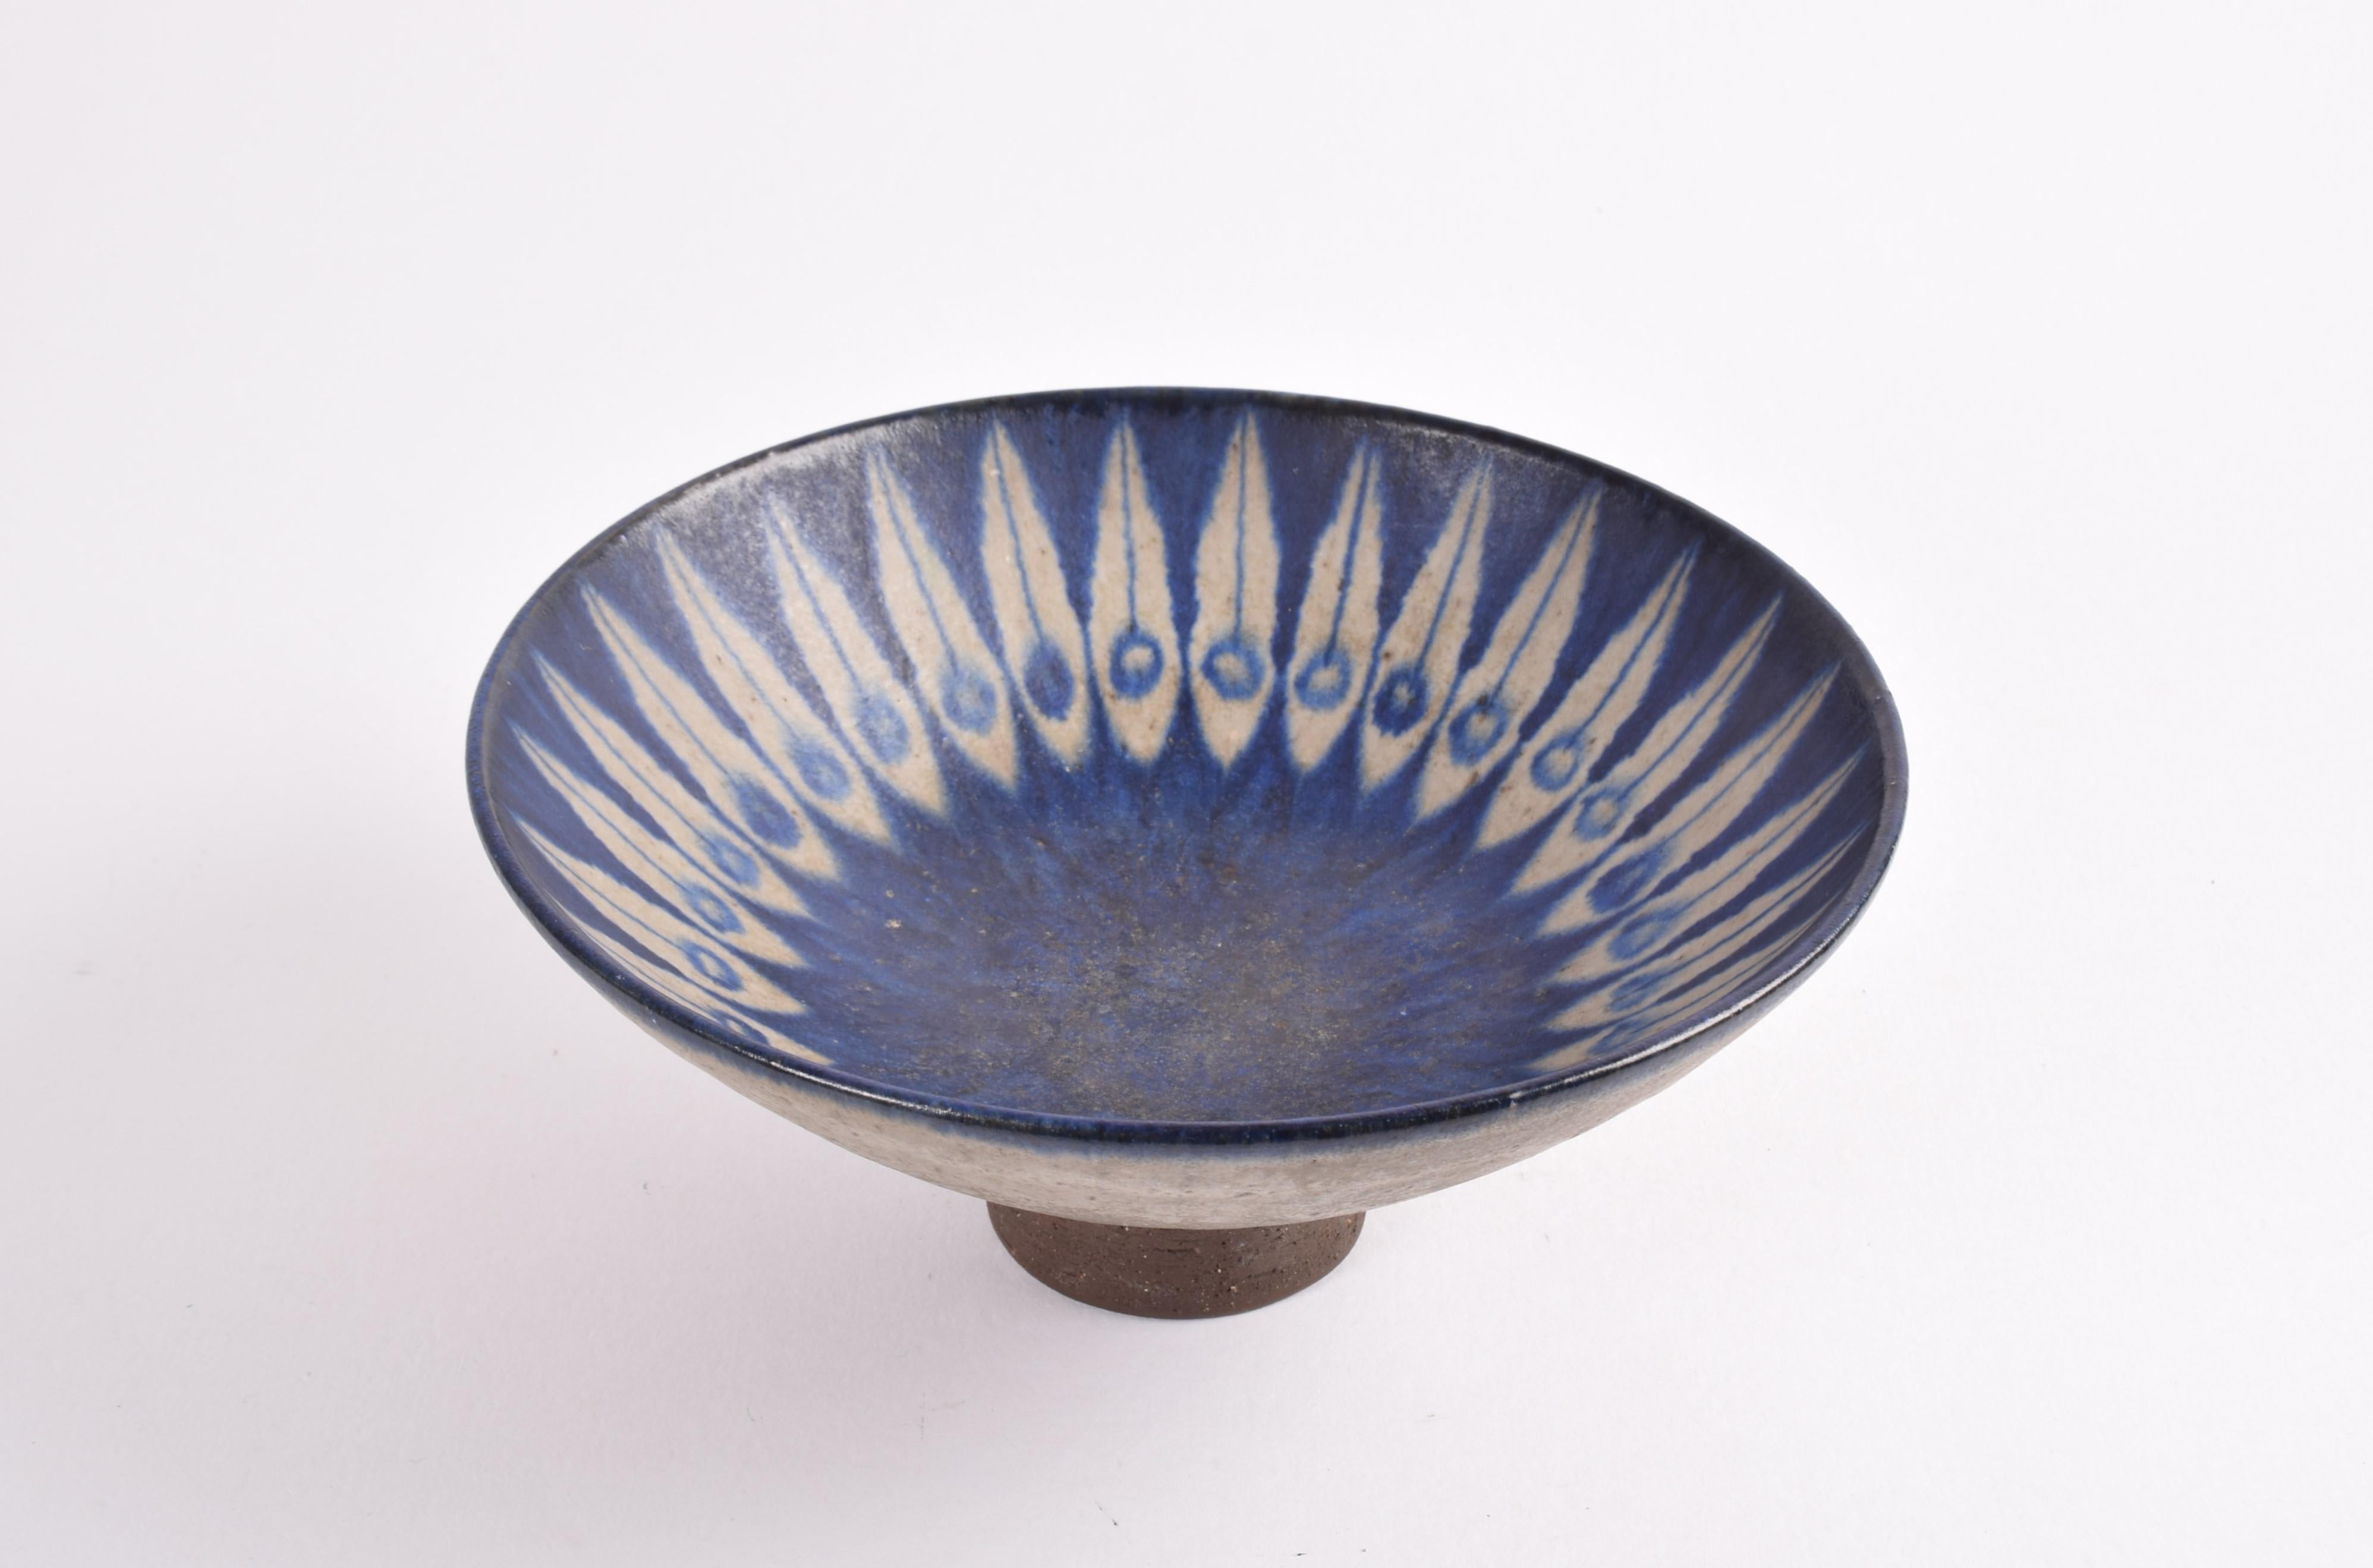 Footed bowl by Danish ceramist Thomas Toft (1930-2015) made ca. 1960s.

The bowl is made from chamotte clay and has a matte glaze in beige gray with blue peacock like decoration. The glazed part is contrasted by the unglazed foot and lowest part